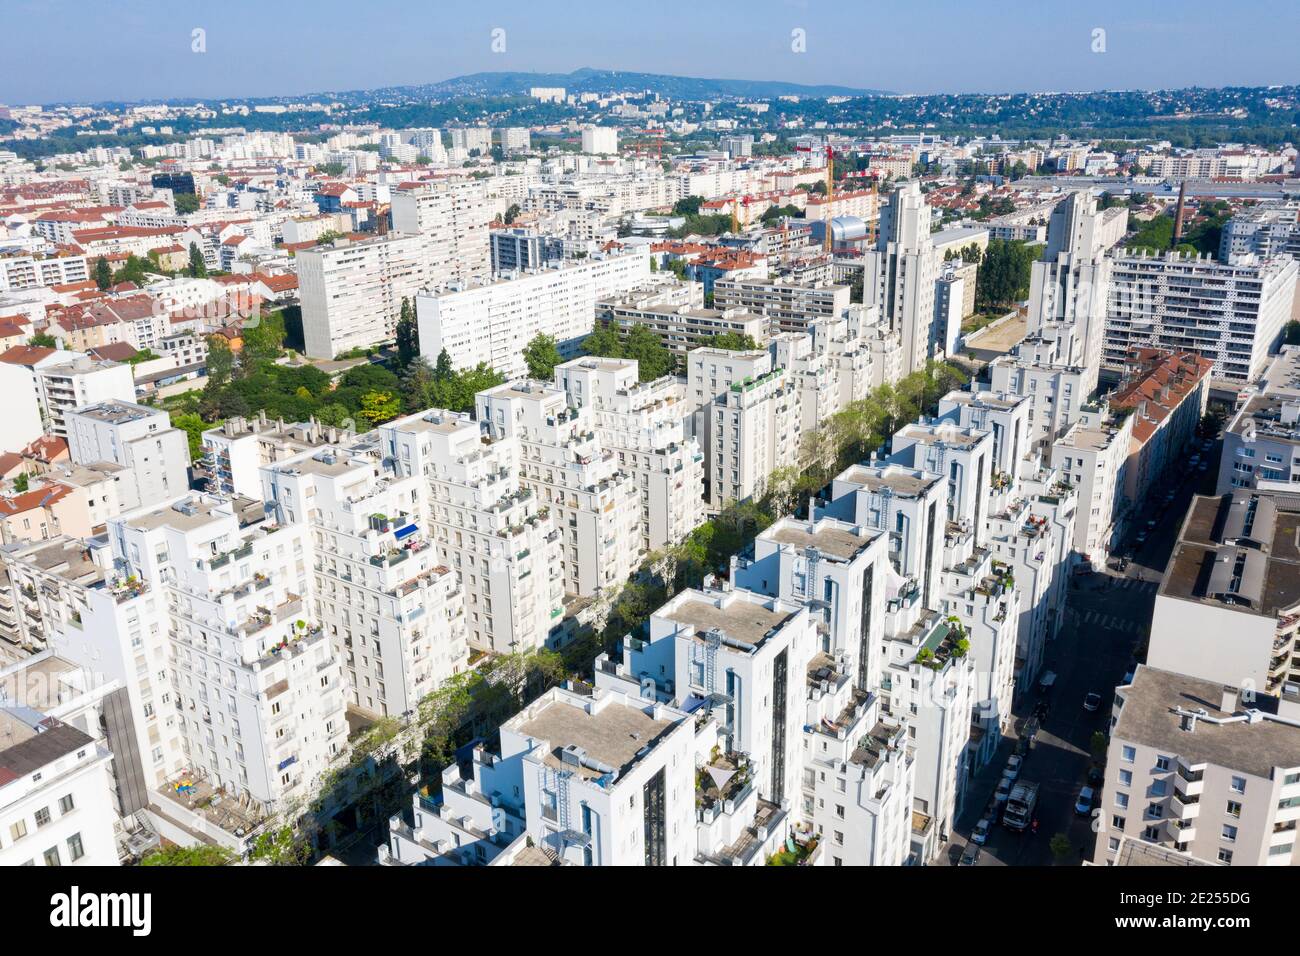 Villeurbanne (central-eastern France): architectural complex “Les gratte-ciel” (The Skyscrapers) consisting of “place Lazare Goujon” square, the City Stock Photo